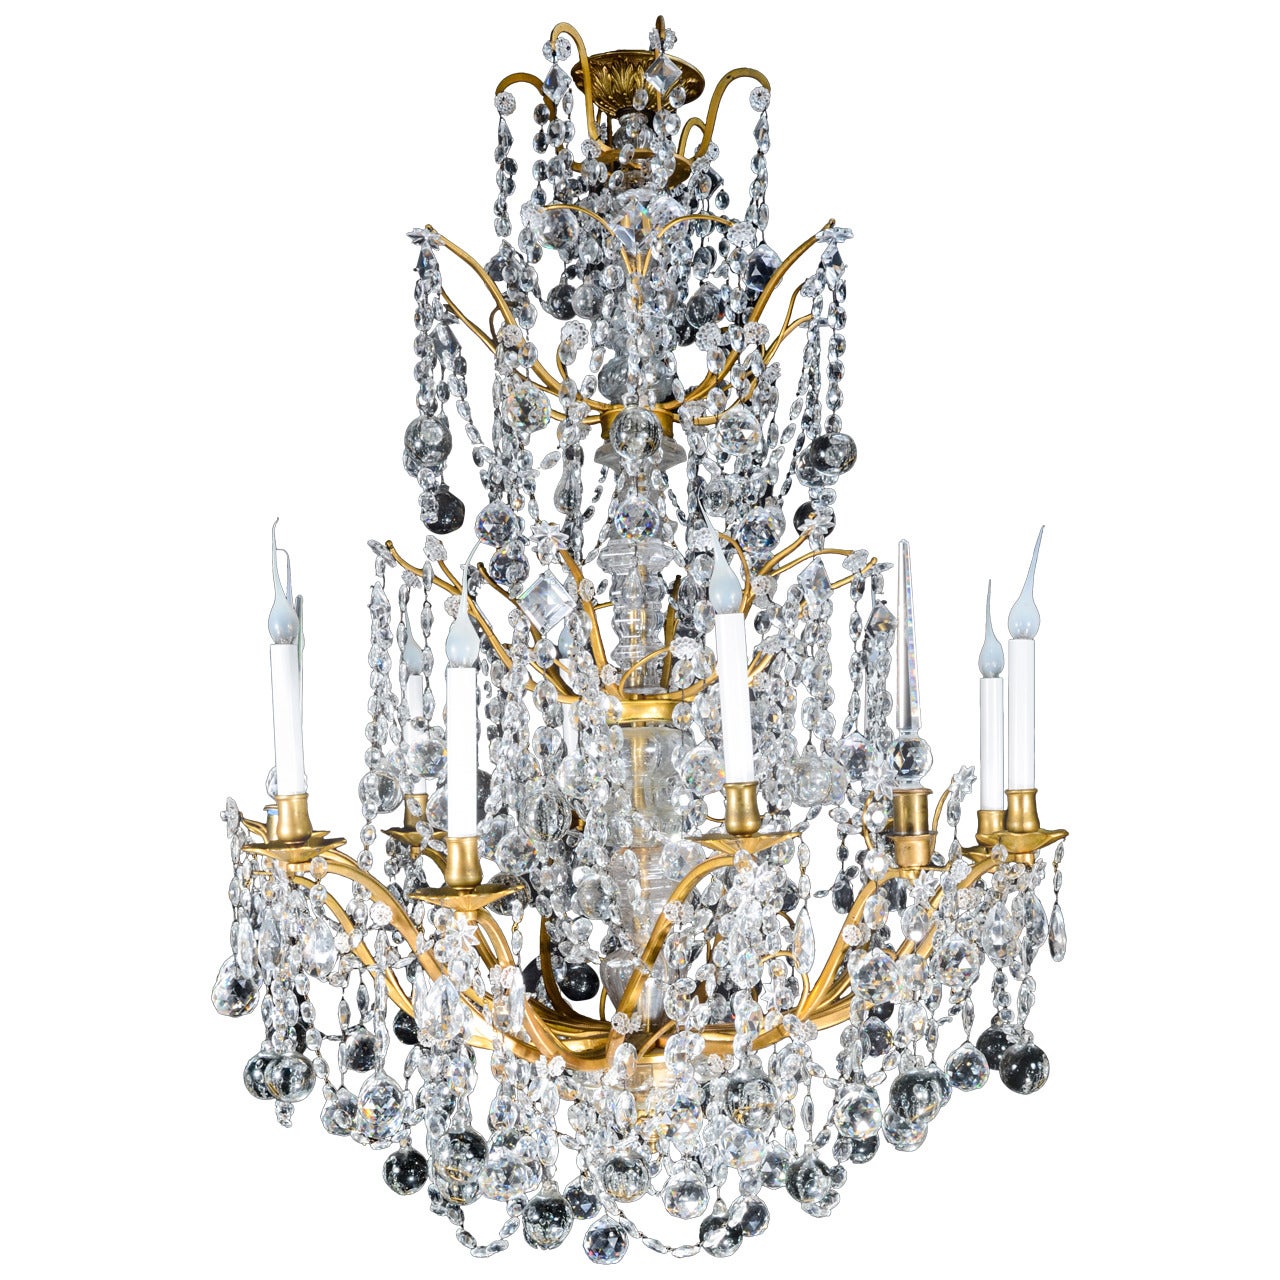 Large Antique French Louis XVI Style Gilt Bronze and Cut Crystal Chandelier